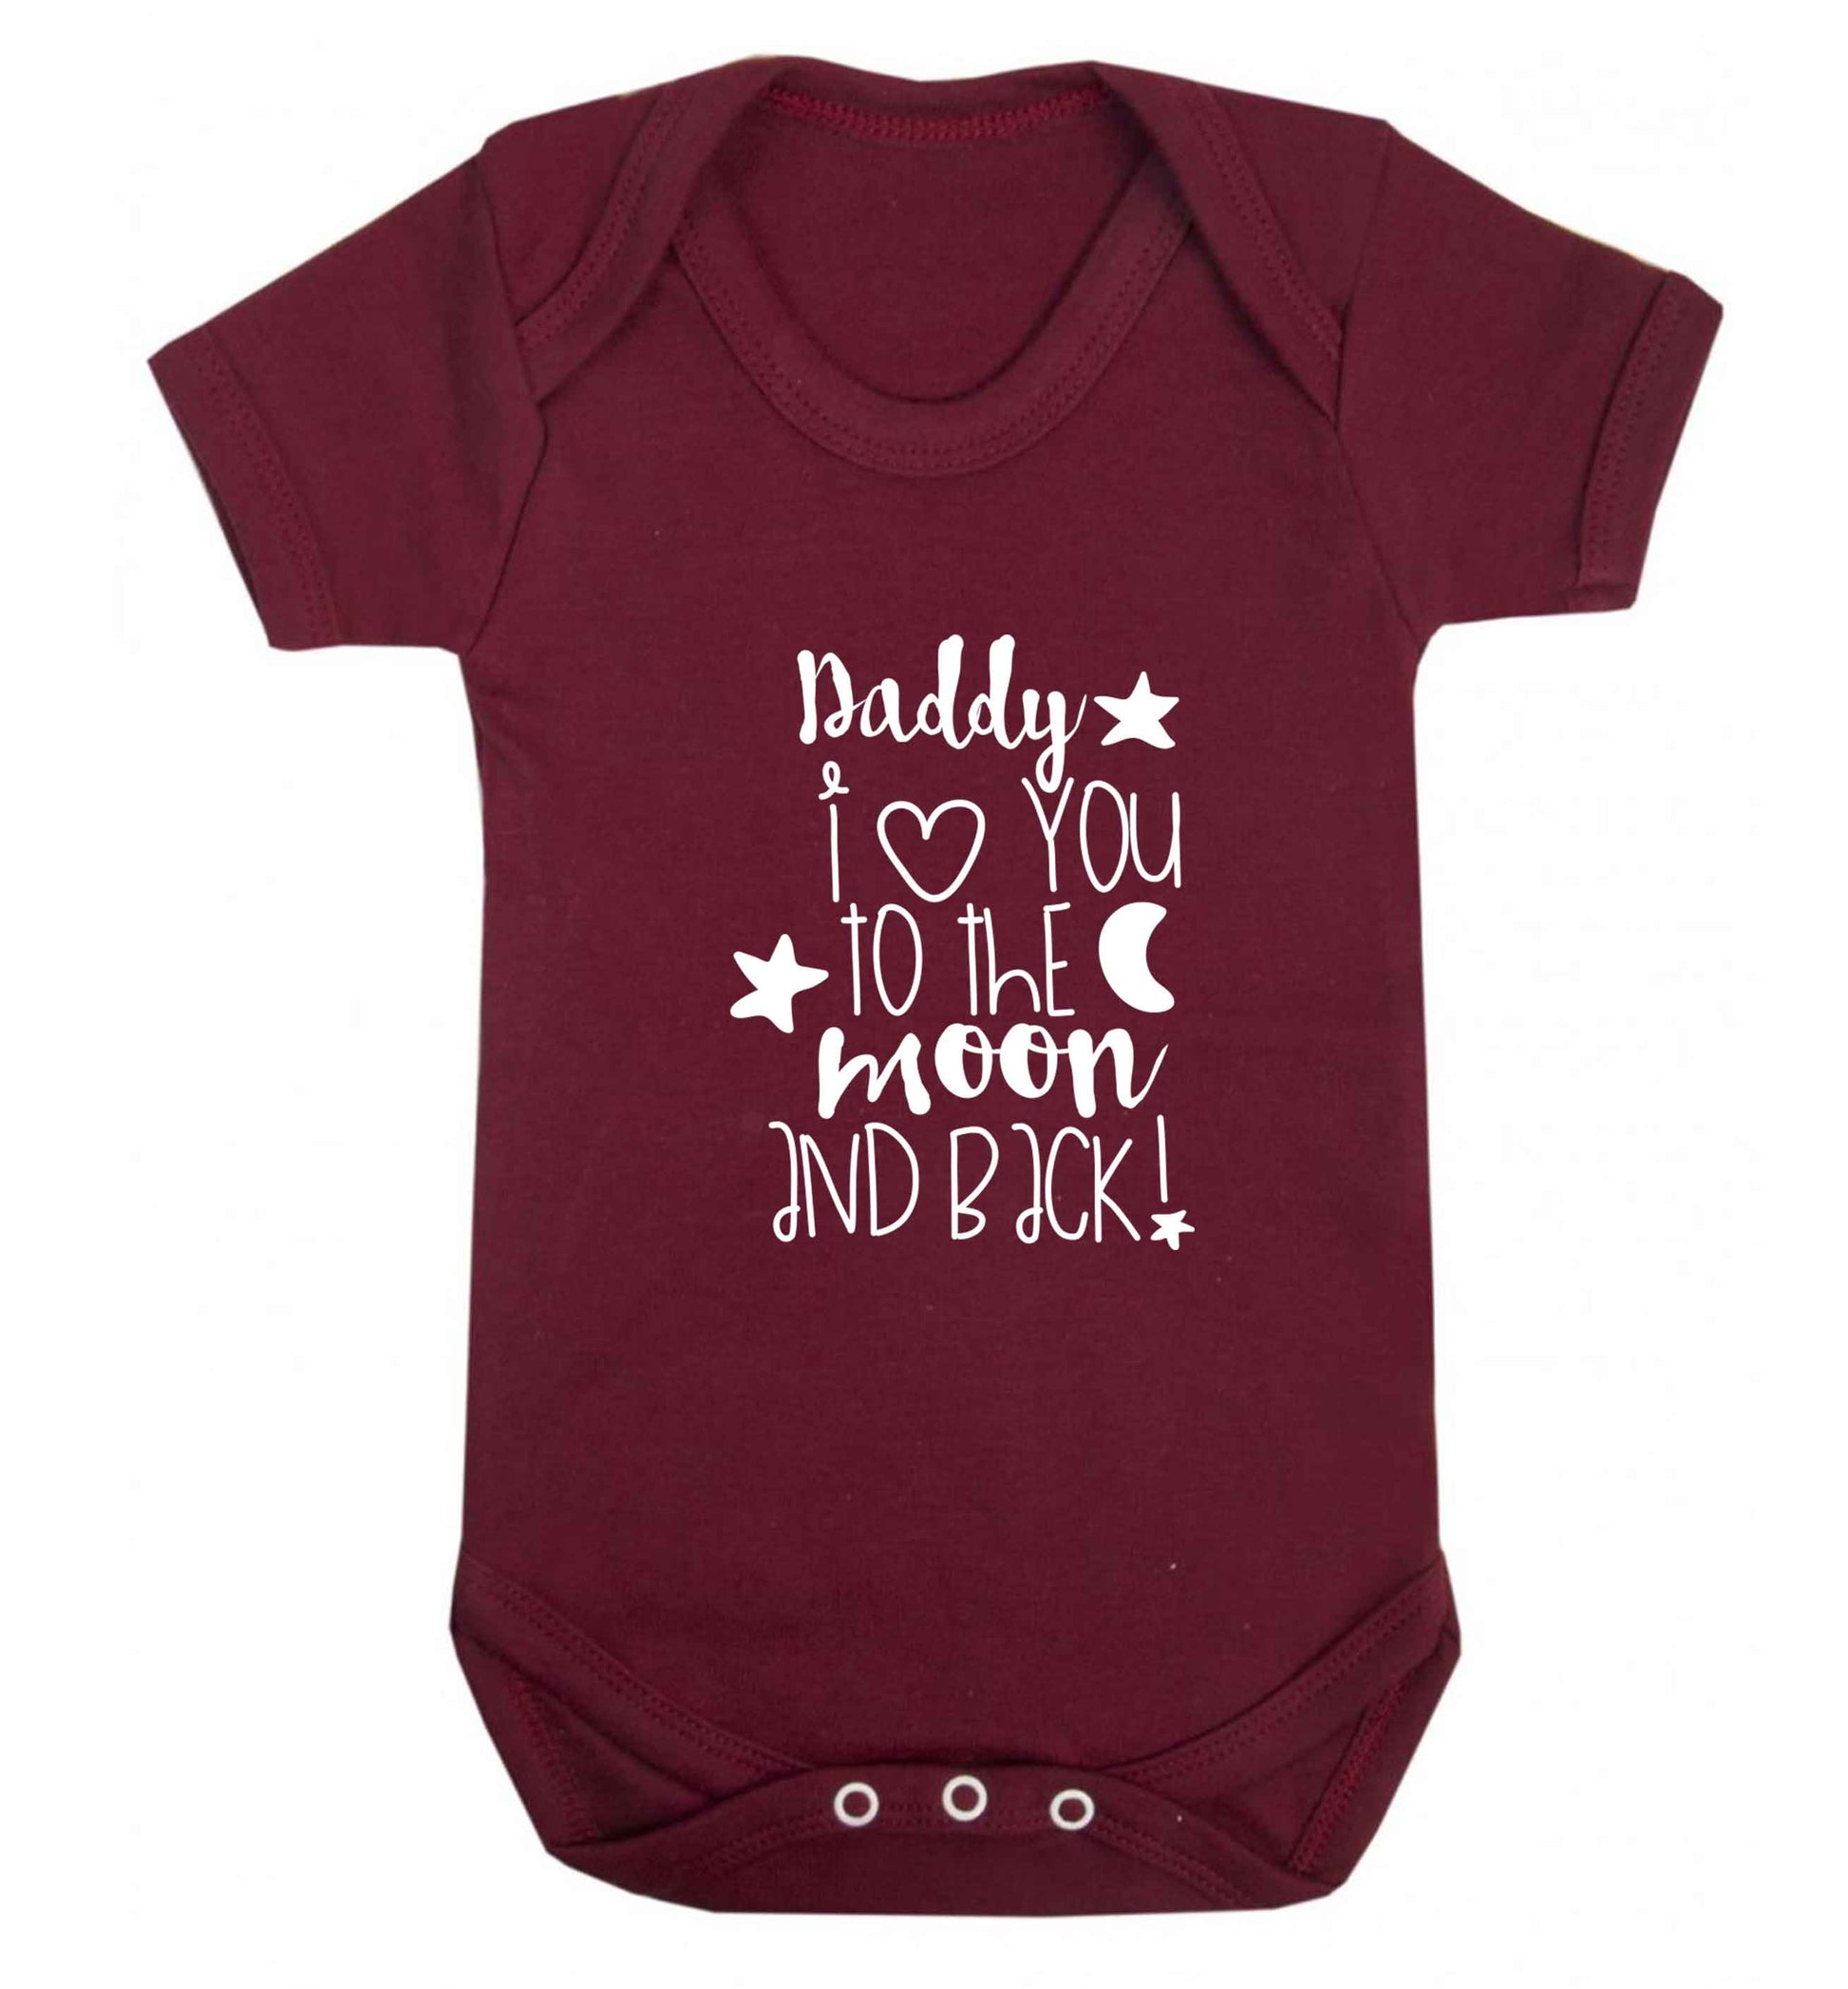 Daddy I love you to the moon and back baby vest maroon 18-24 months